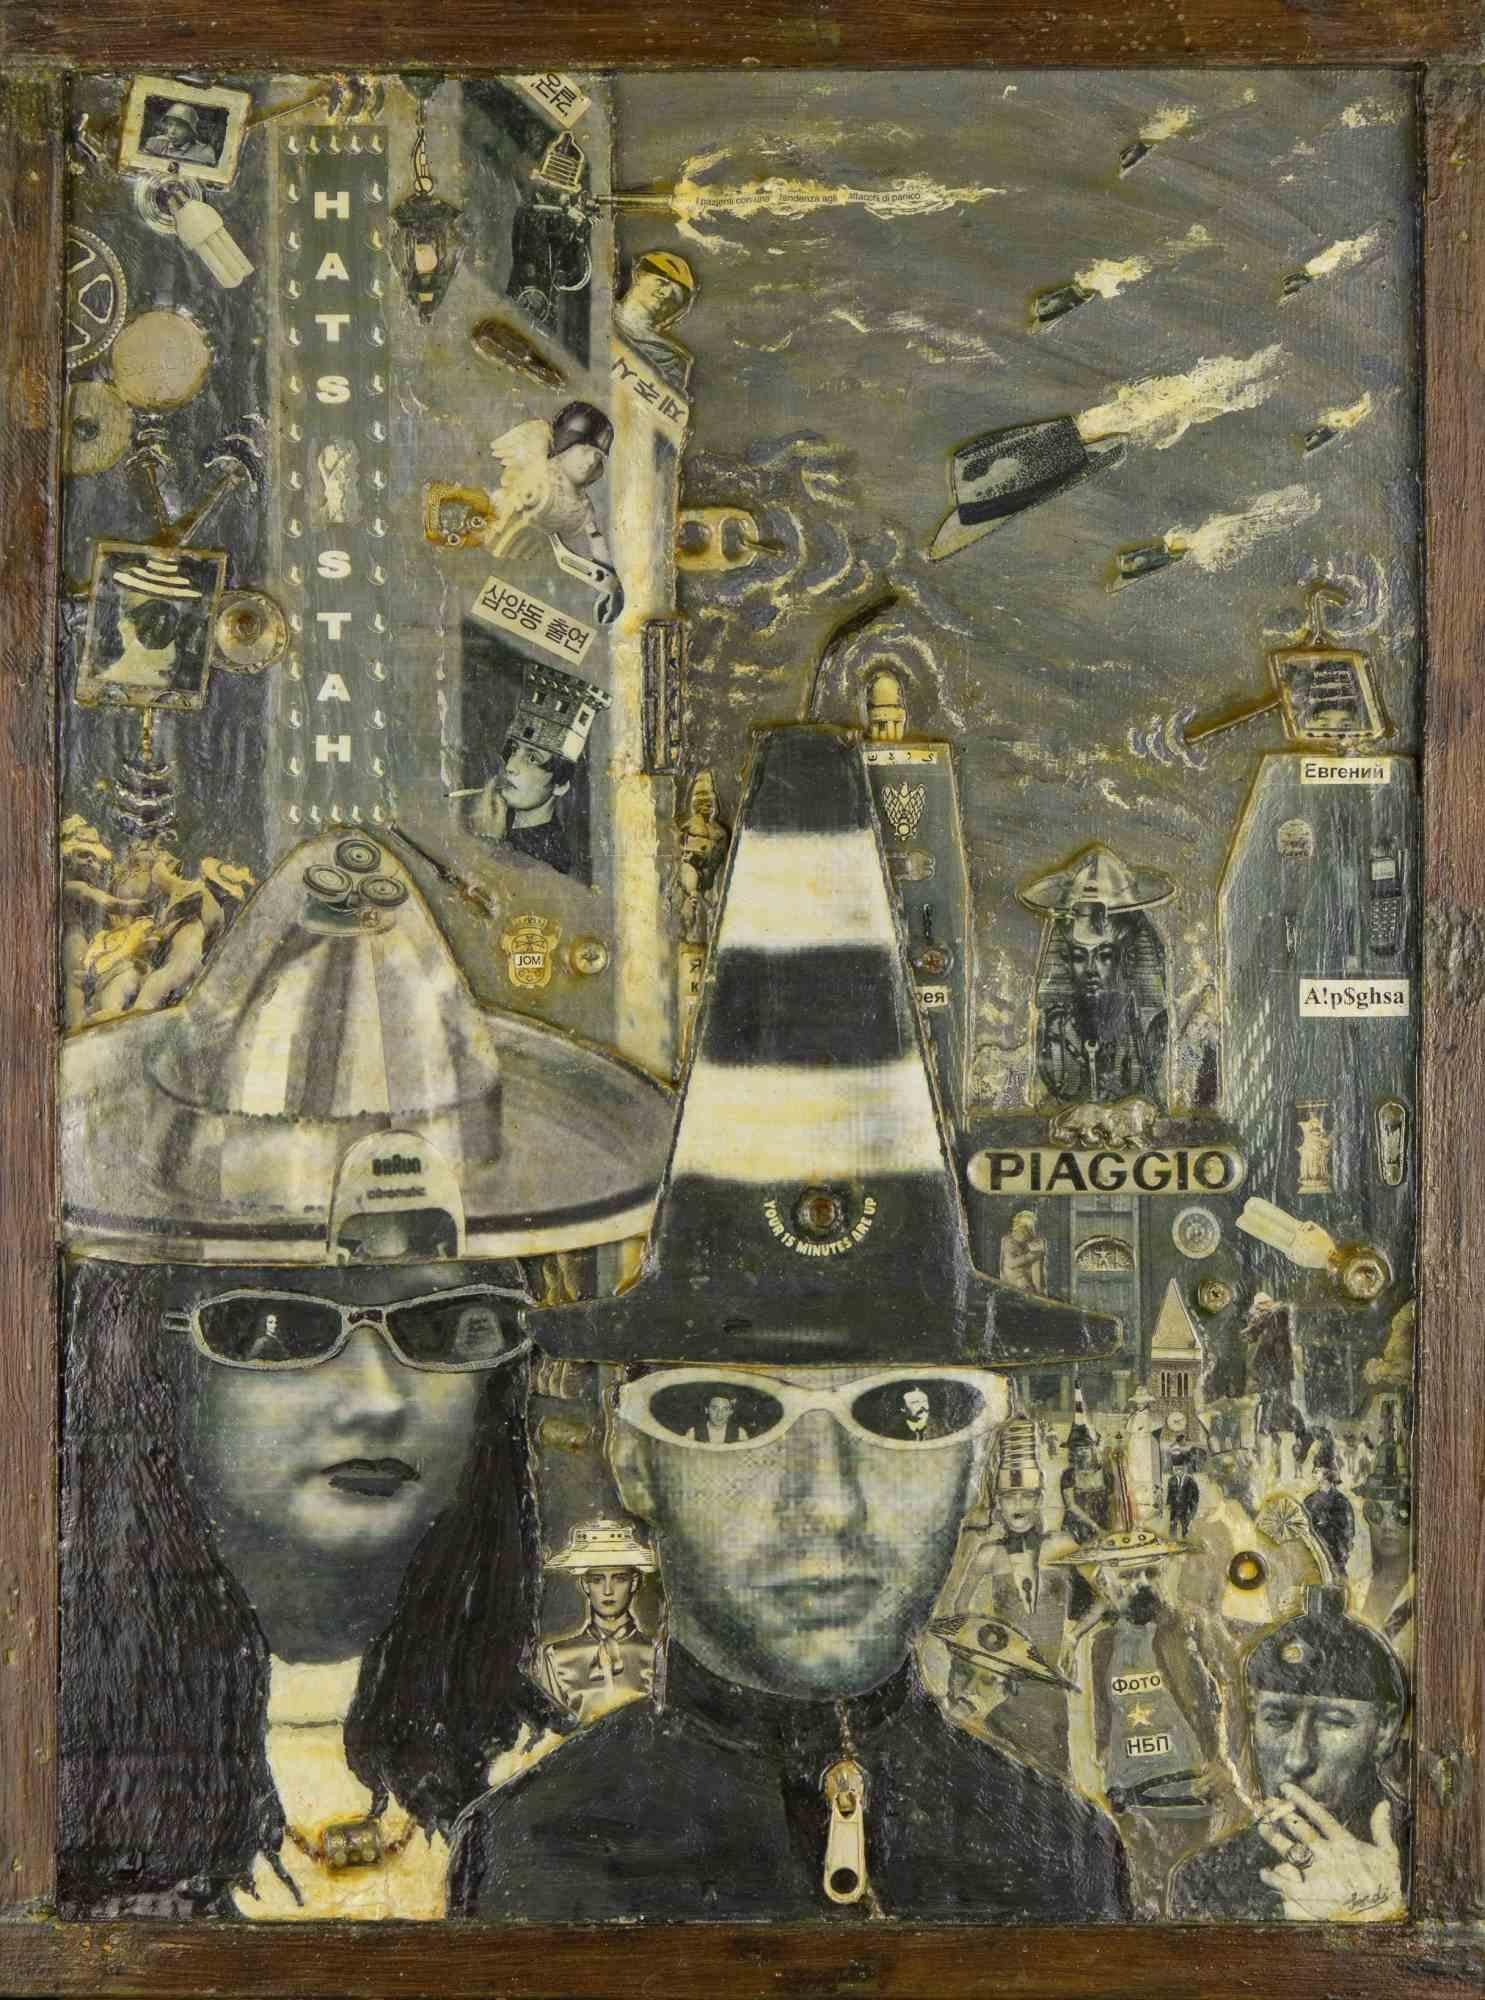 Hats-Stah is one of the best works realized by Alberto Sordi in 2011.

Under a sky furrowed by gangsta hats, numerous characters with bizarre headdresses roam. The couple in the foreground wears glasses that allow visions of important people from